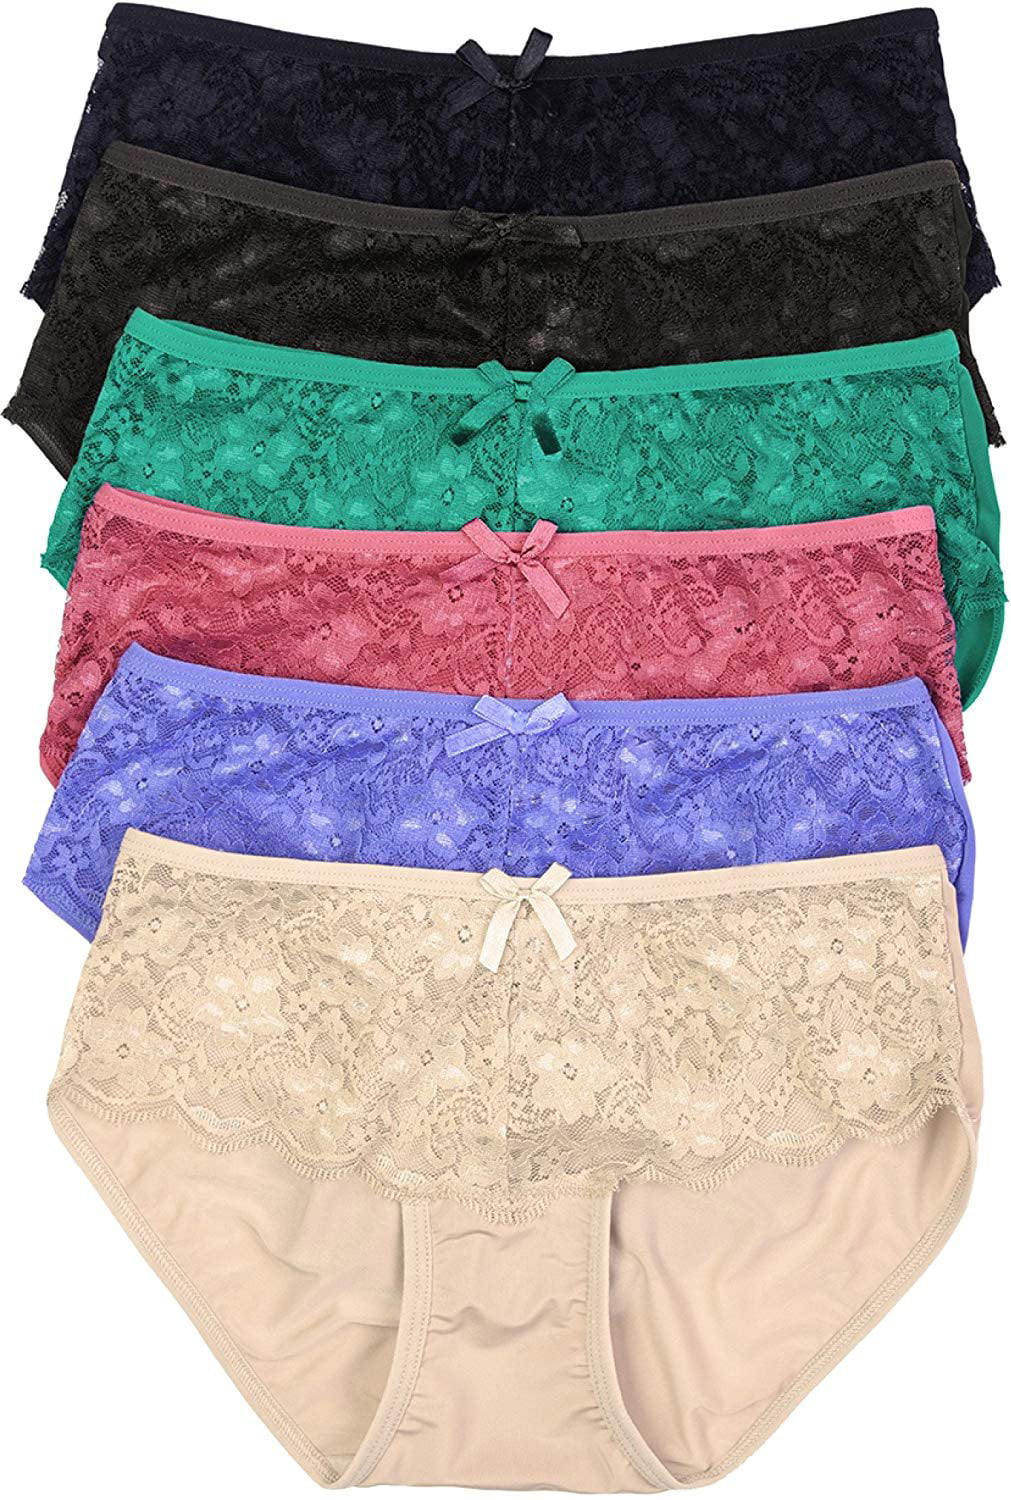 ToBeInStyle Women's Pack of 6 Floral Lace Panties 